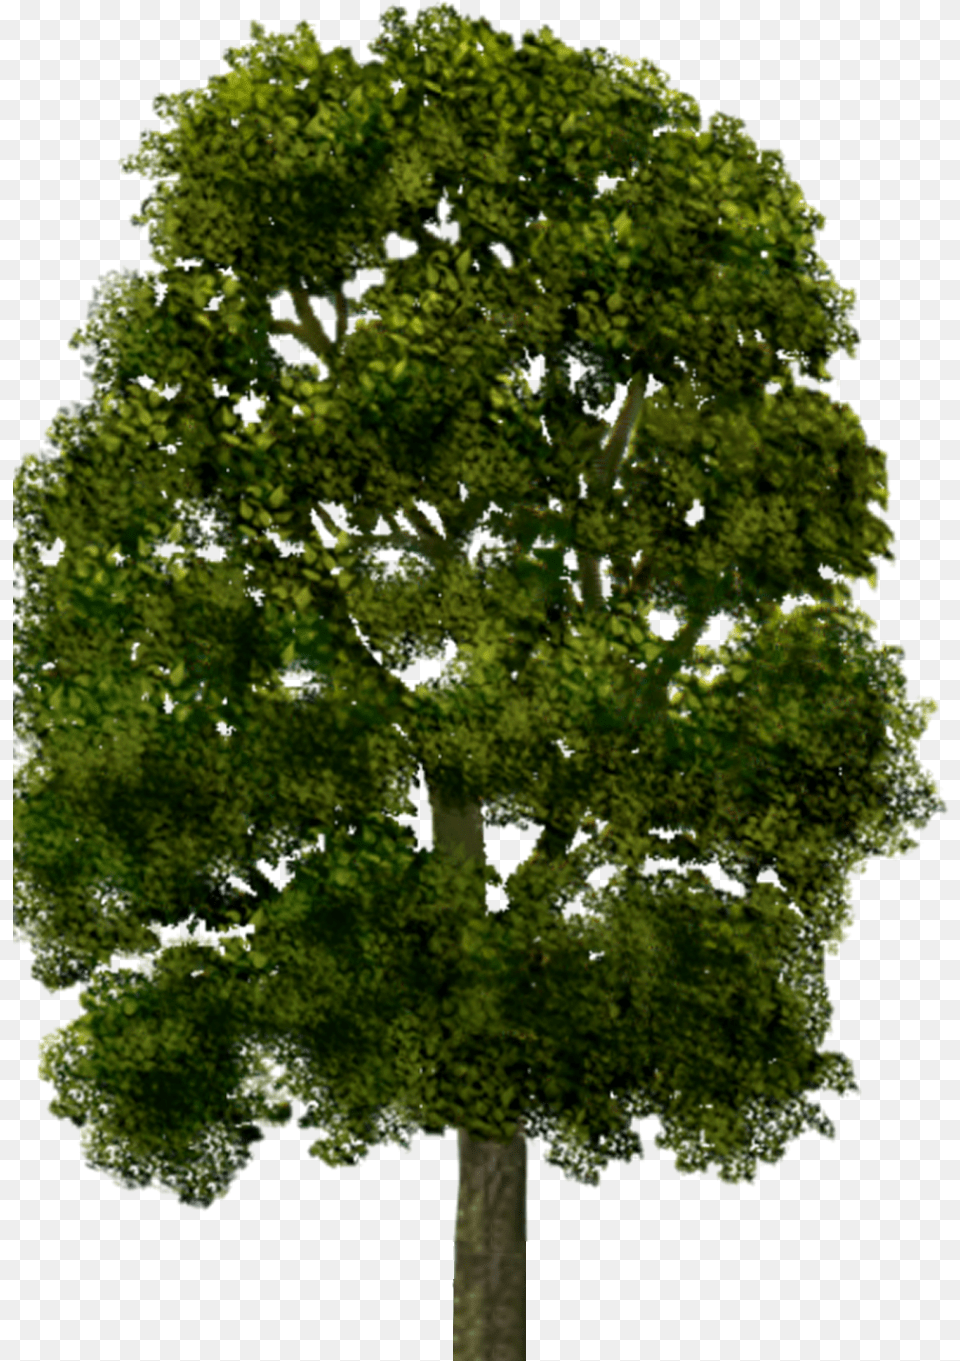 Oak, Plant, Tree Trunk, Tree, Sycamore Png